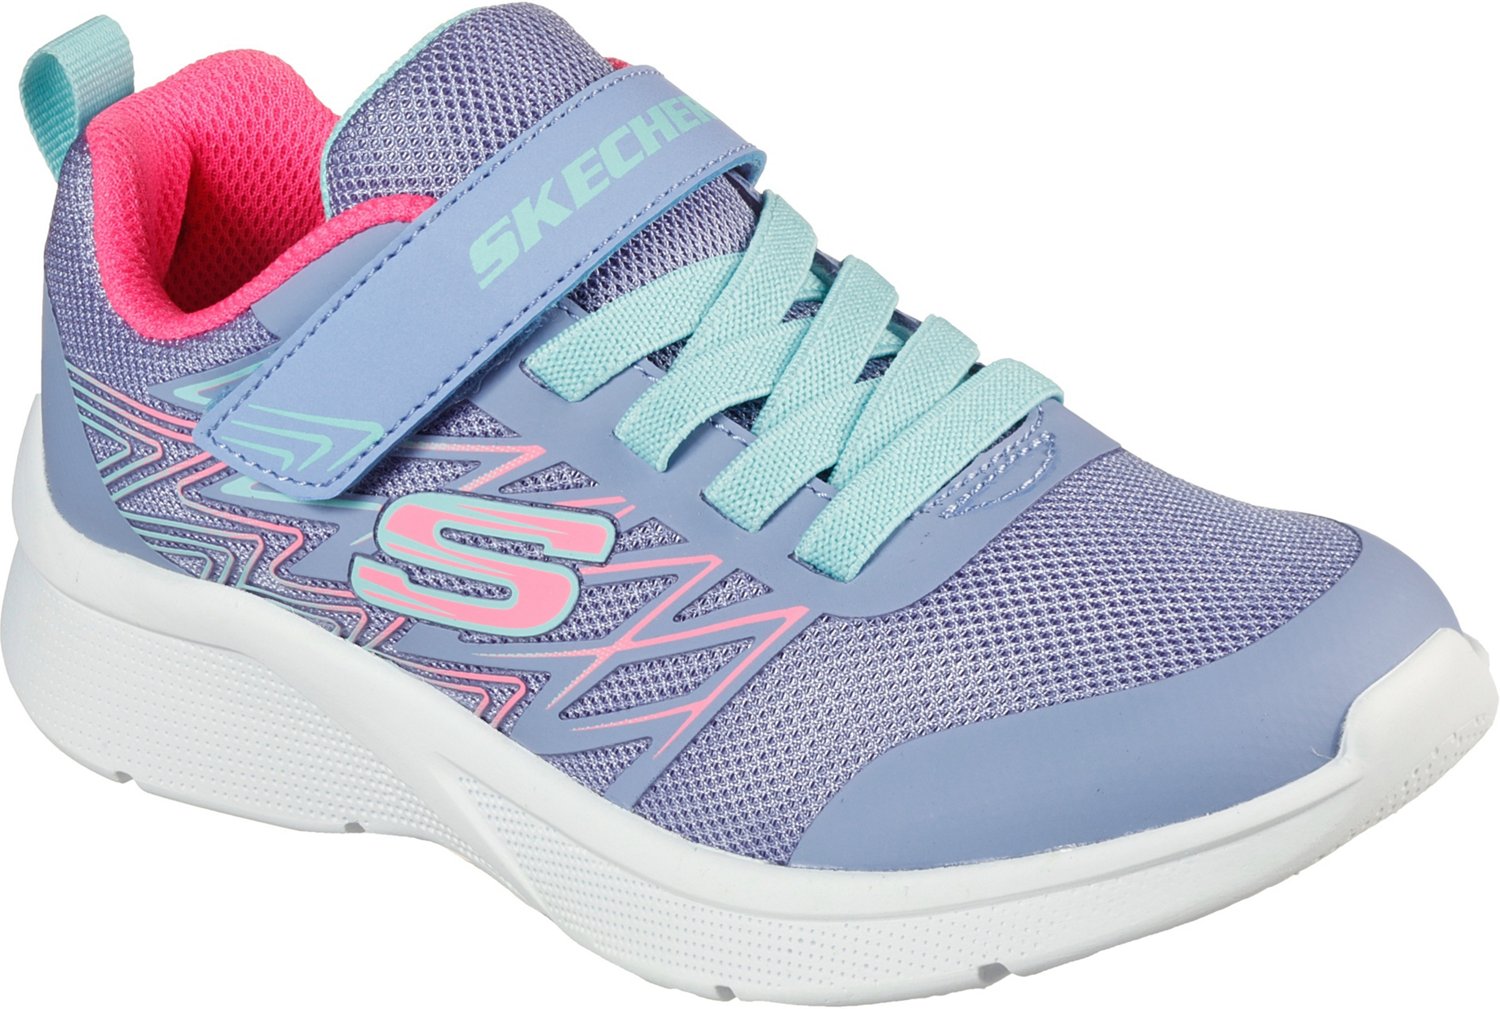 skechers shoes at academy